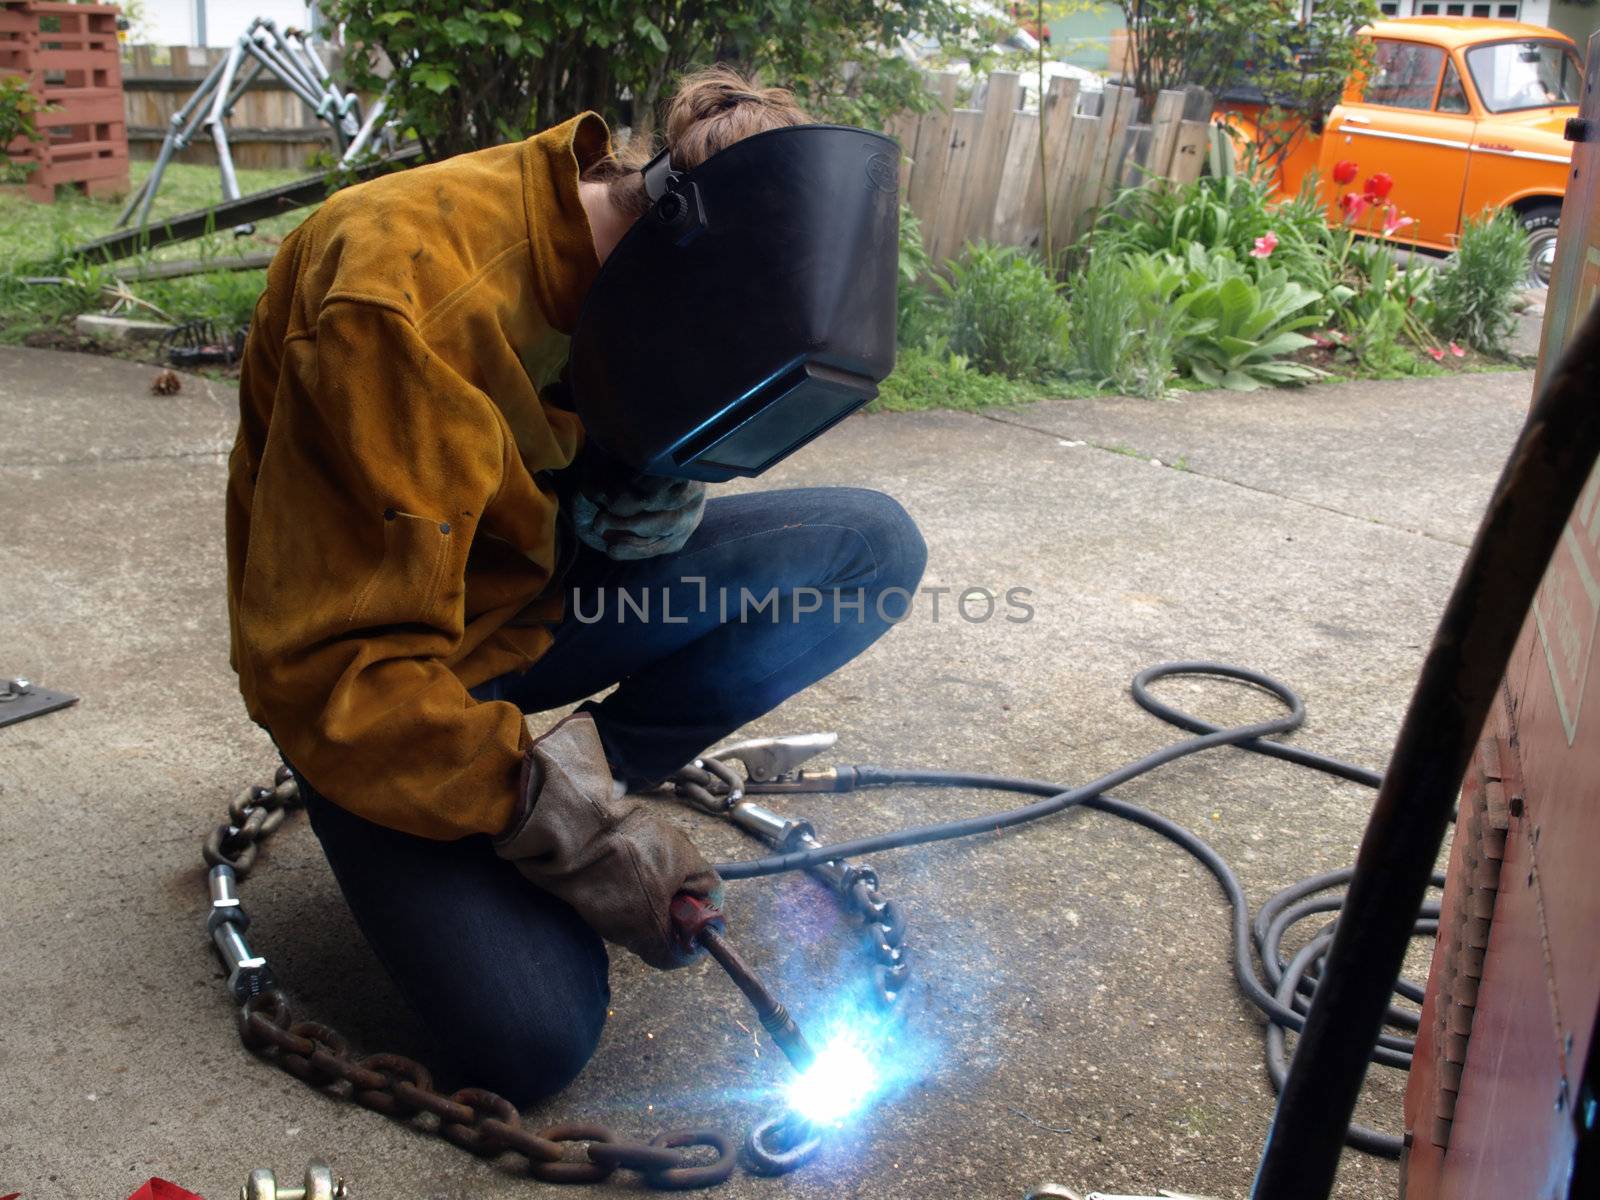 A woman wearing protective gear welds a piece of chain together.